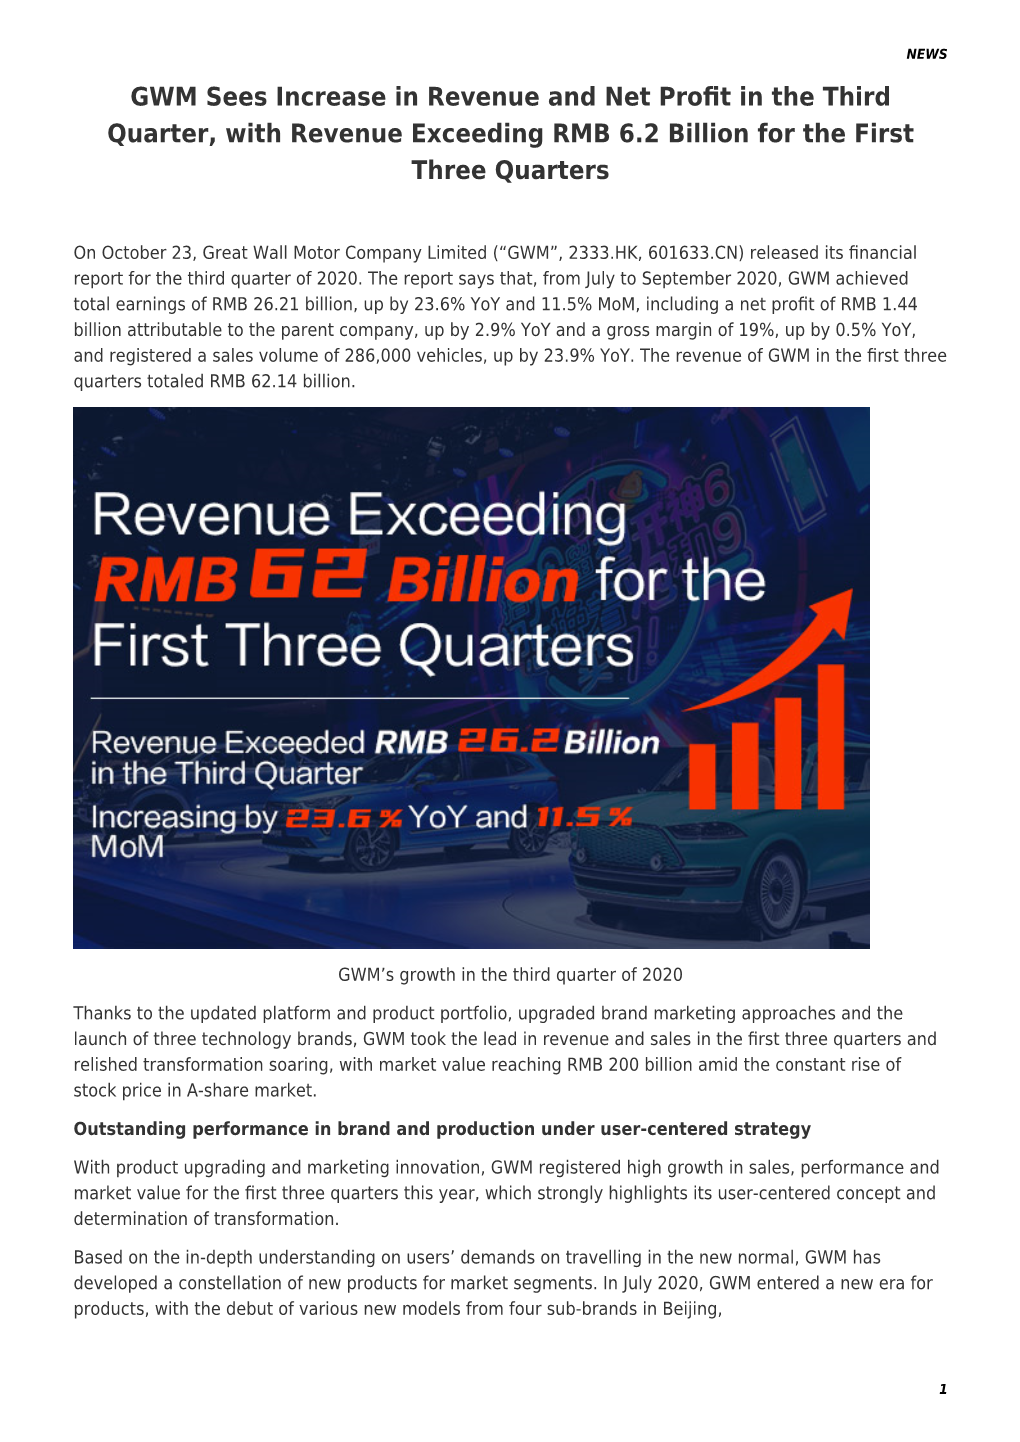 GWM Sees Increase in Revenue and Net Profit in the Third Quarter, With